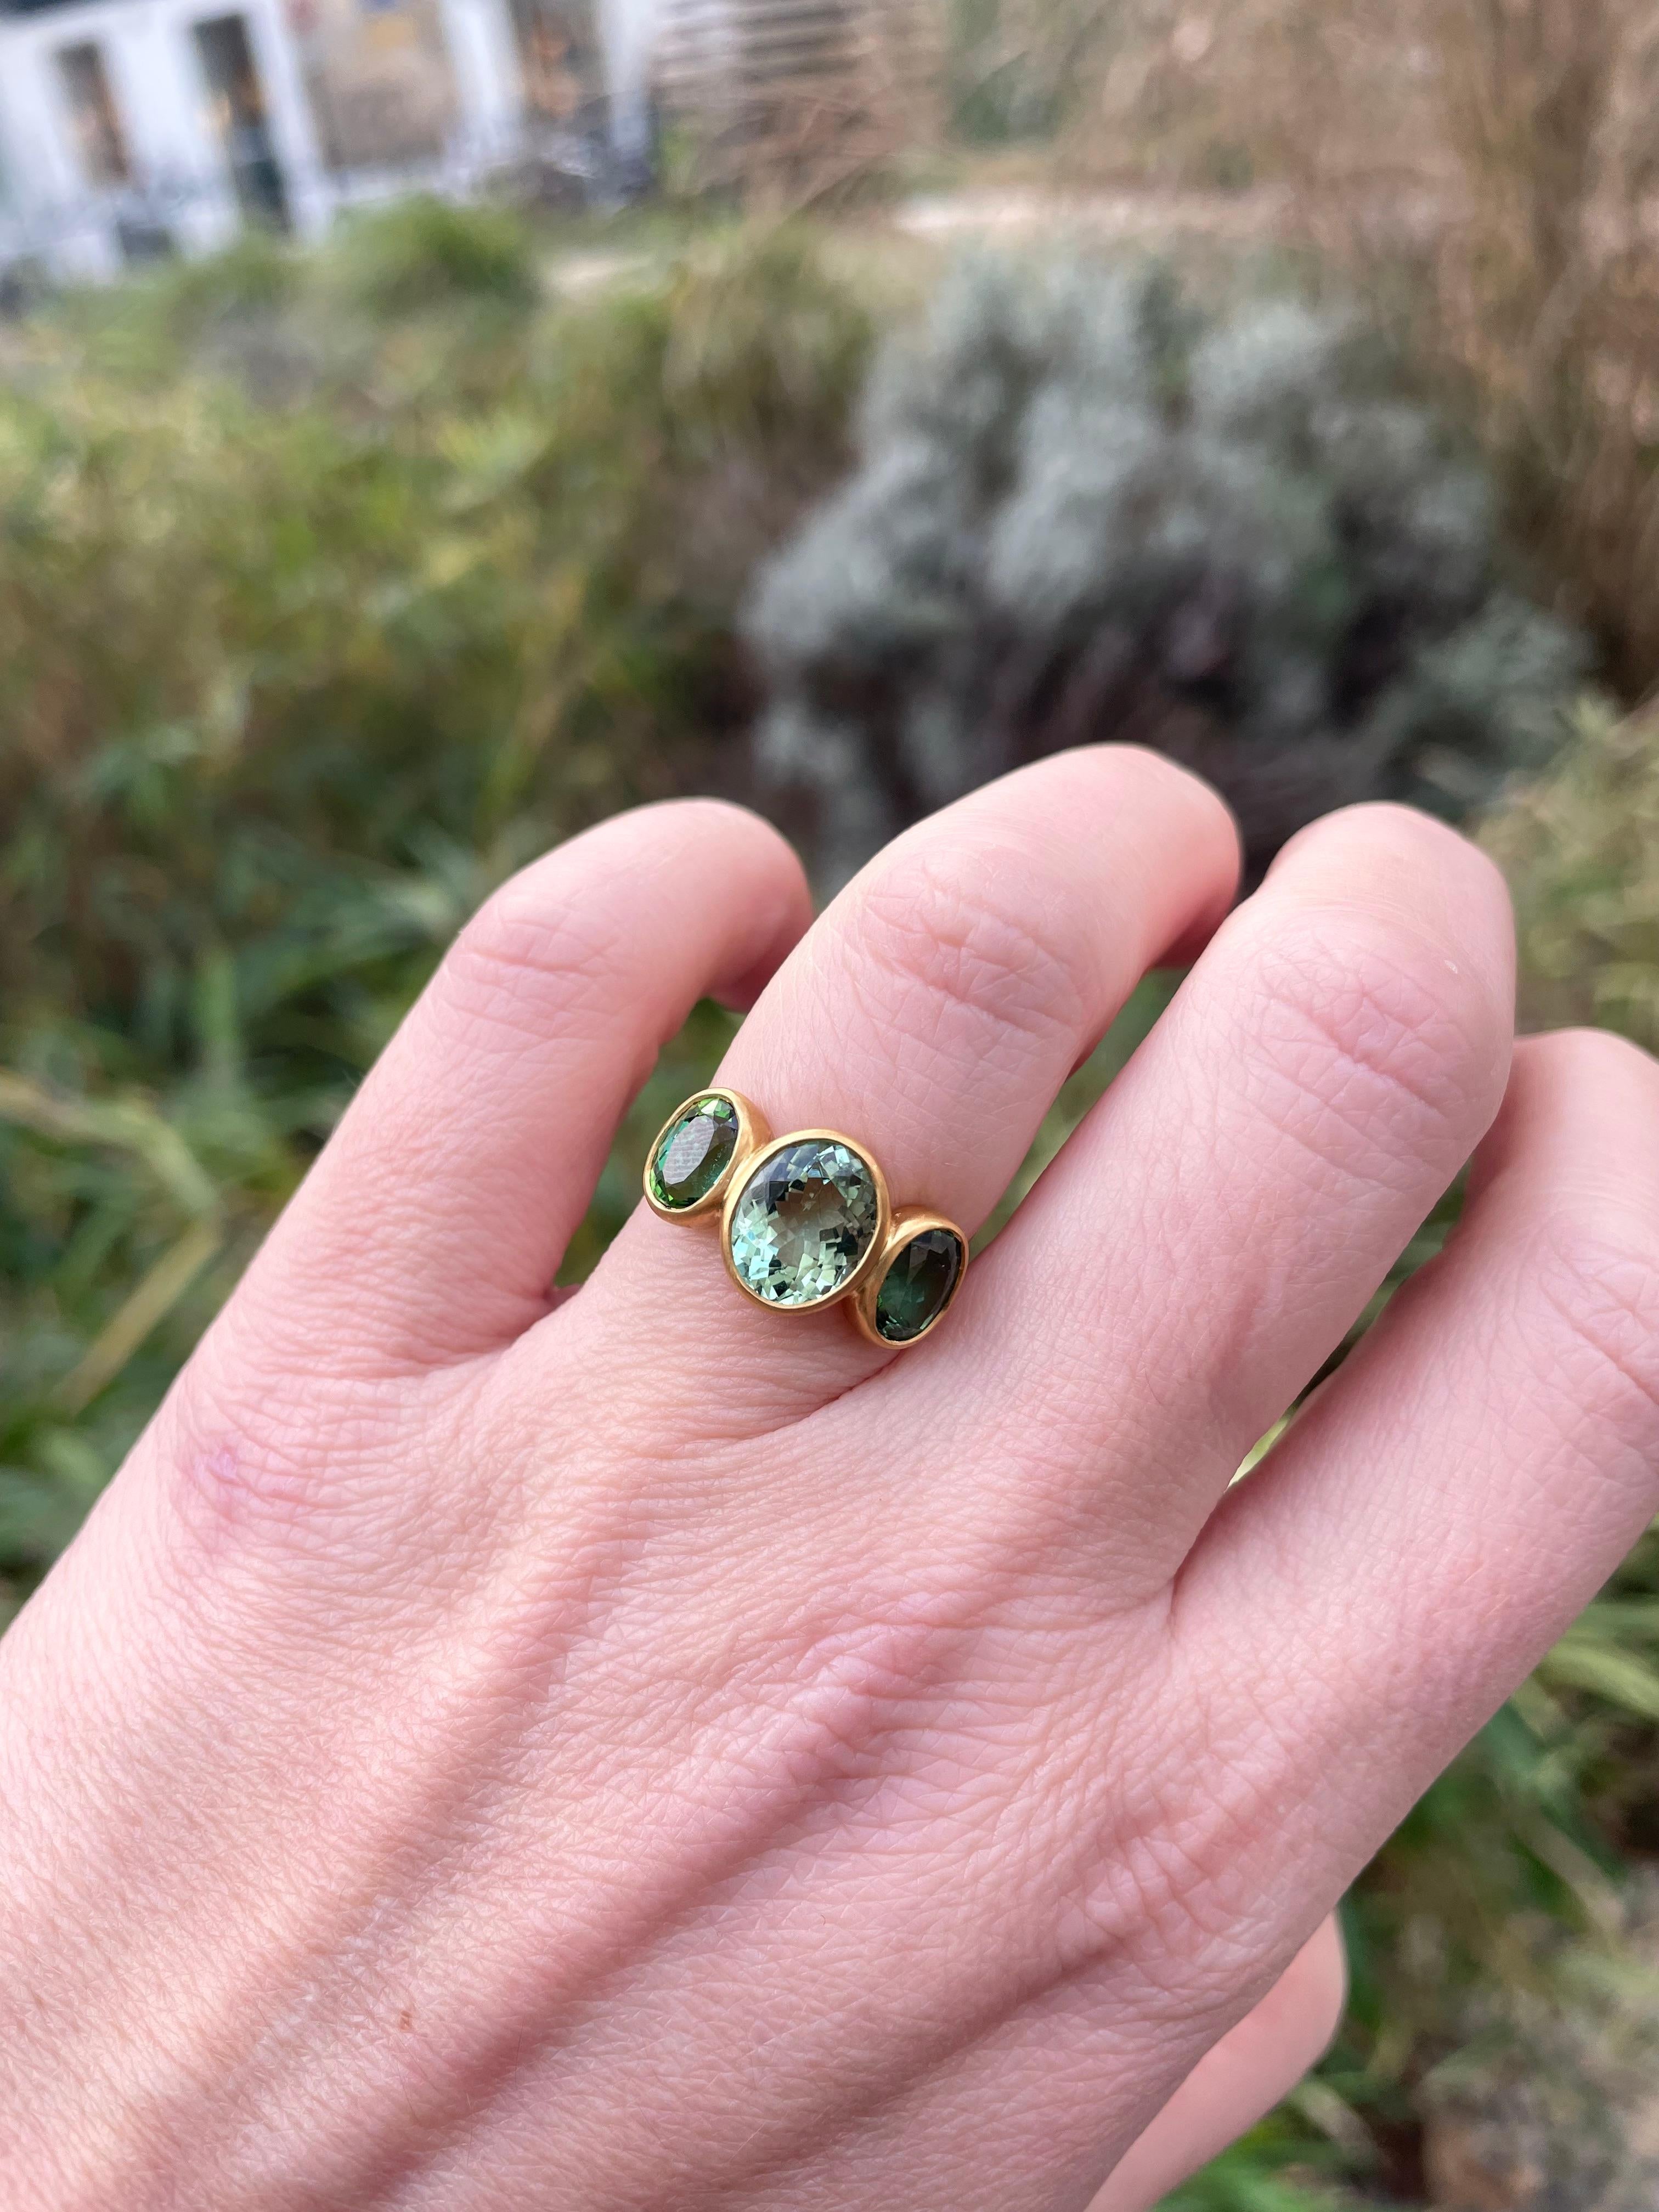 This delicate ring is composed of three green tourmalines faceted of 4.17 cts total weight. The two smaller green tourmalines on the side have a more darker vivid color. The central tourmaline has a lighter green tone. The tourmalines have a